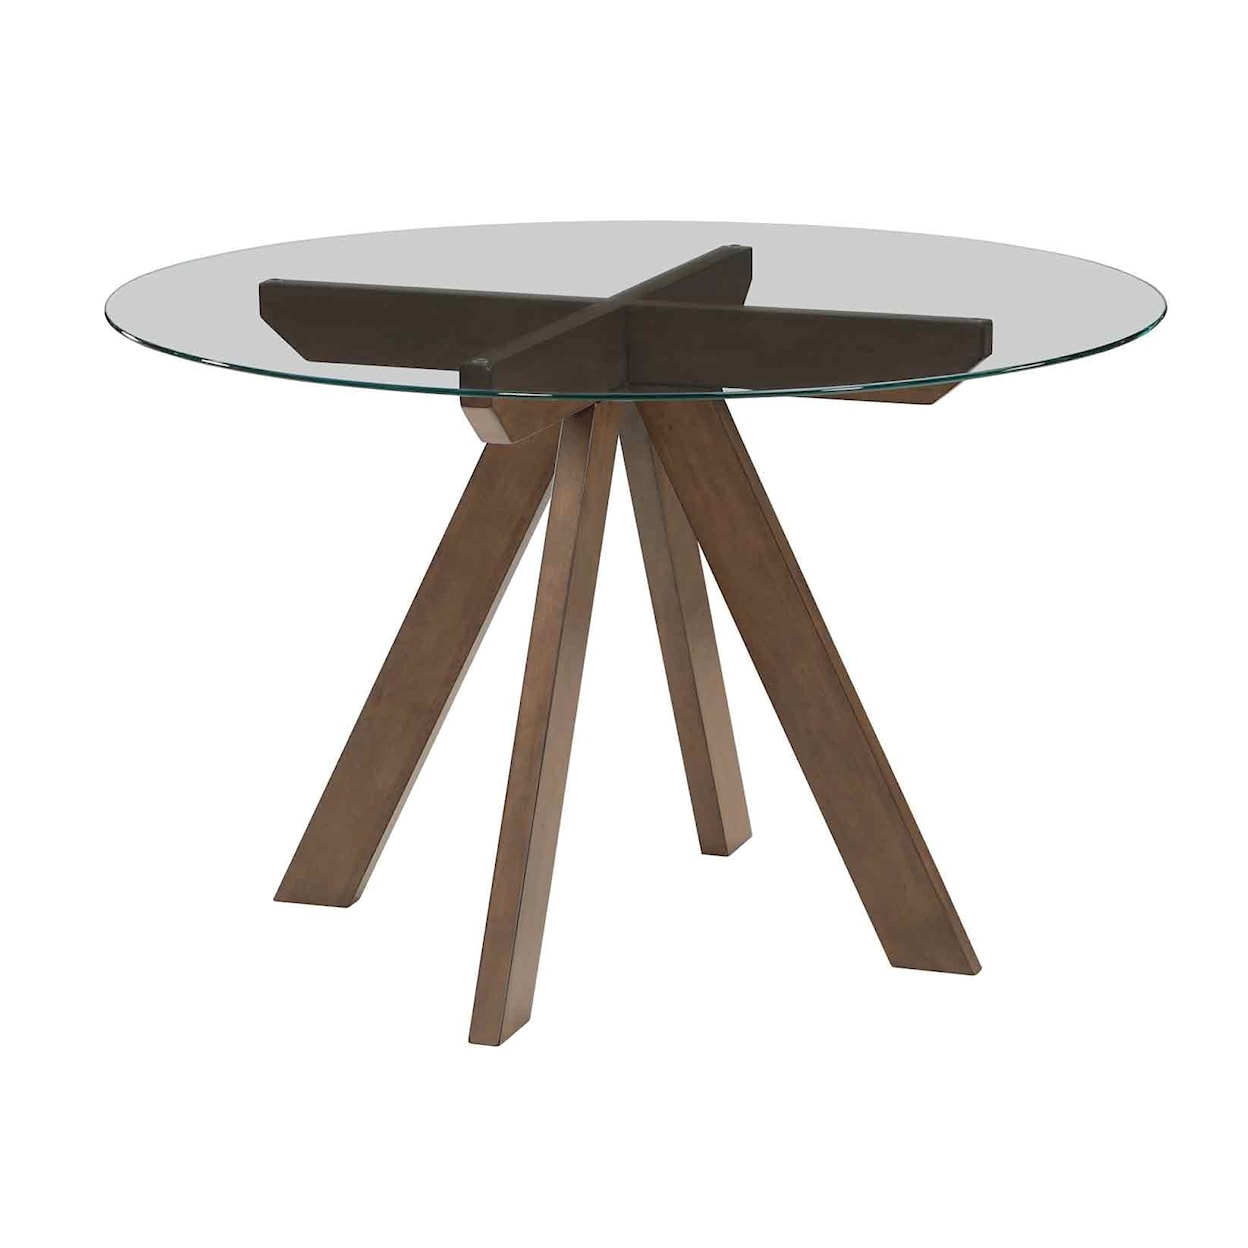 Prime Wade Dining Table